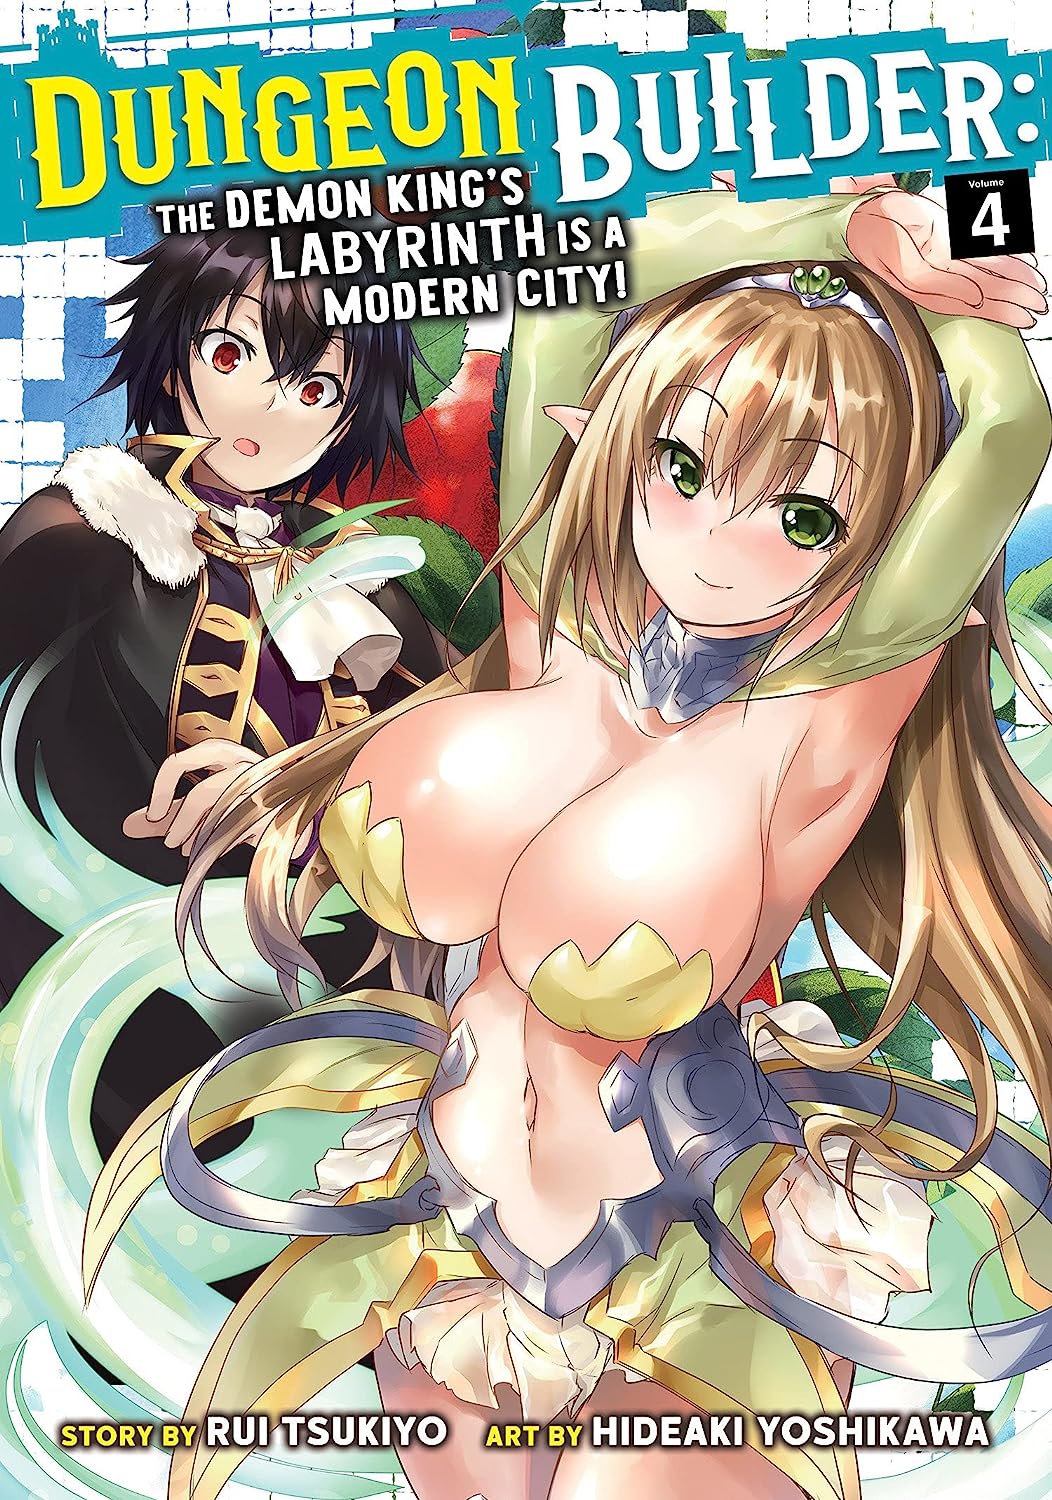 Dungeon Builder: The Demon King's Labyrinth is a Modern City! (Manga) Vol. 4